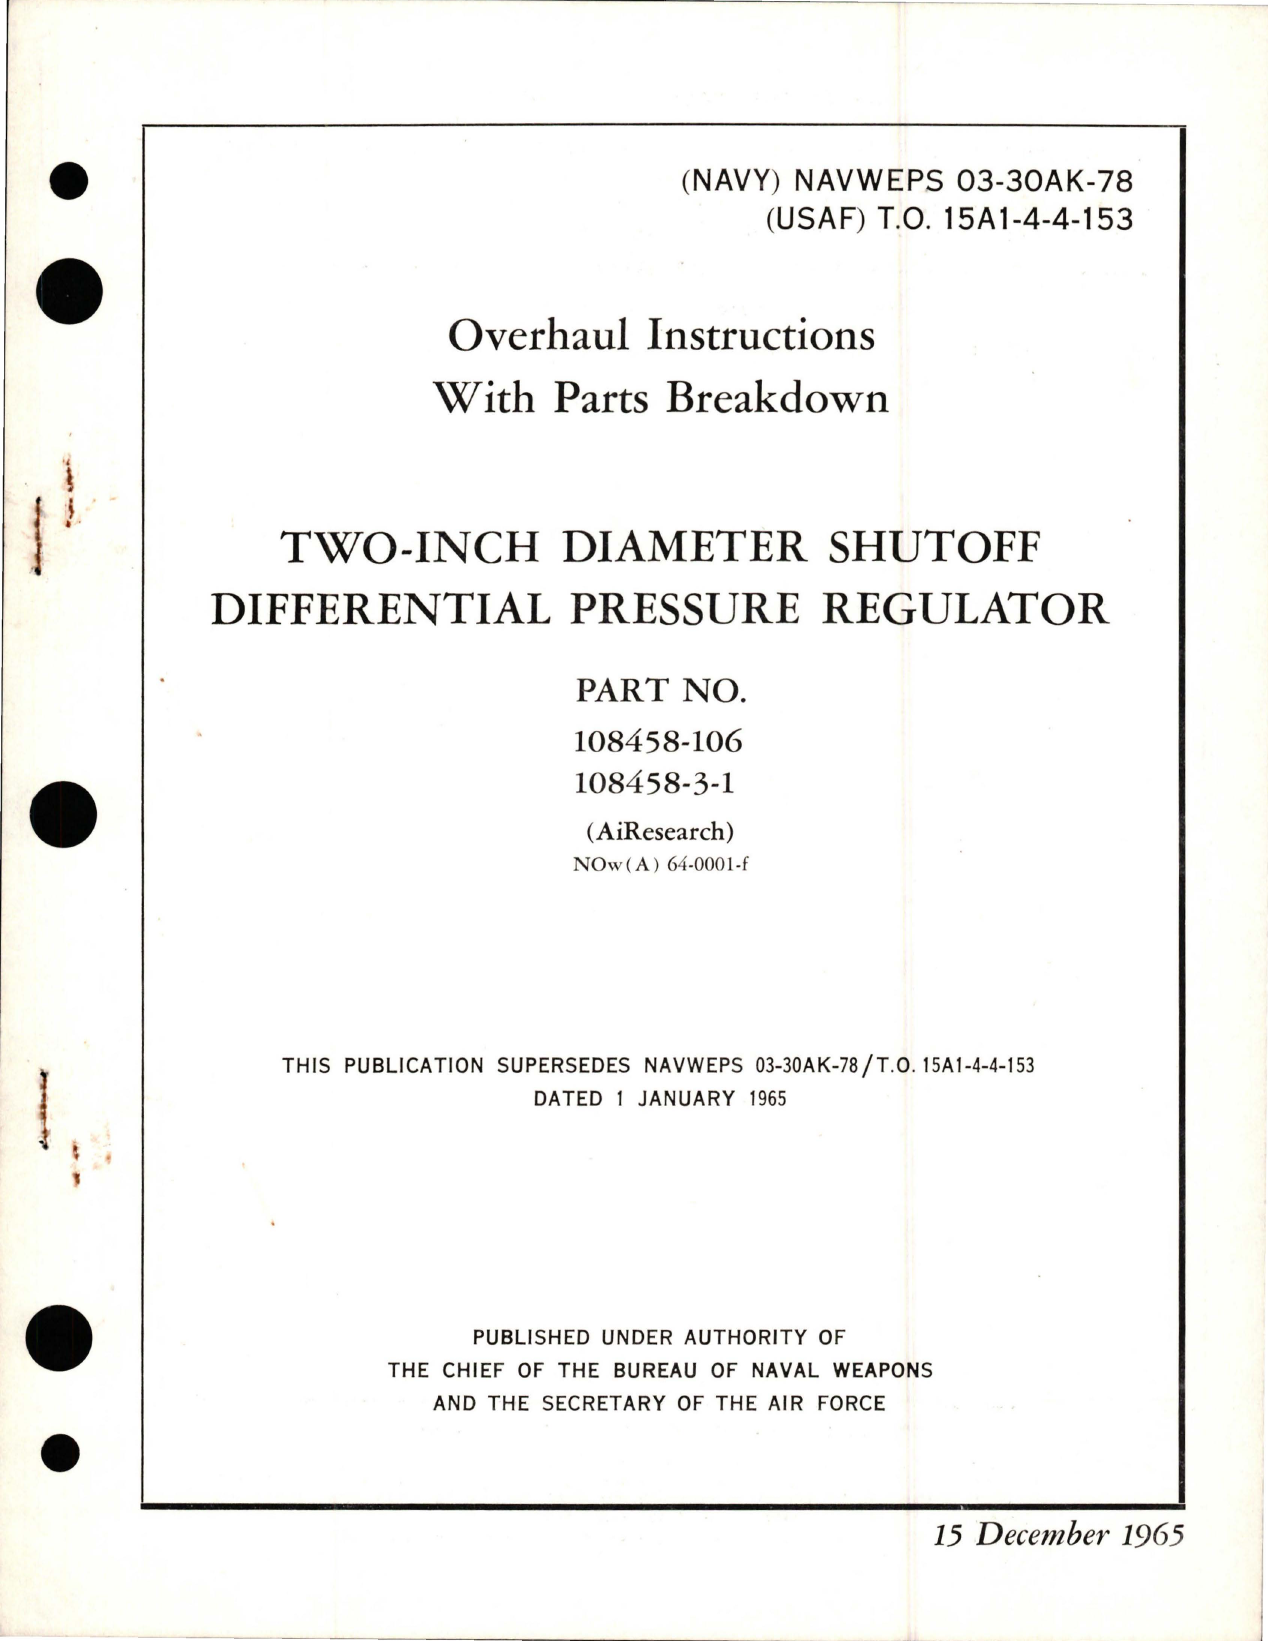 Sample page 1 from AirCorps Library document: Overhaul Instructions with Parts Breakdown for Shutoff Differential Pressure Regulator - 2